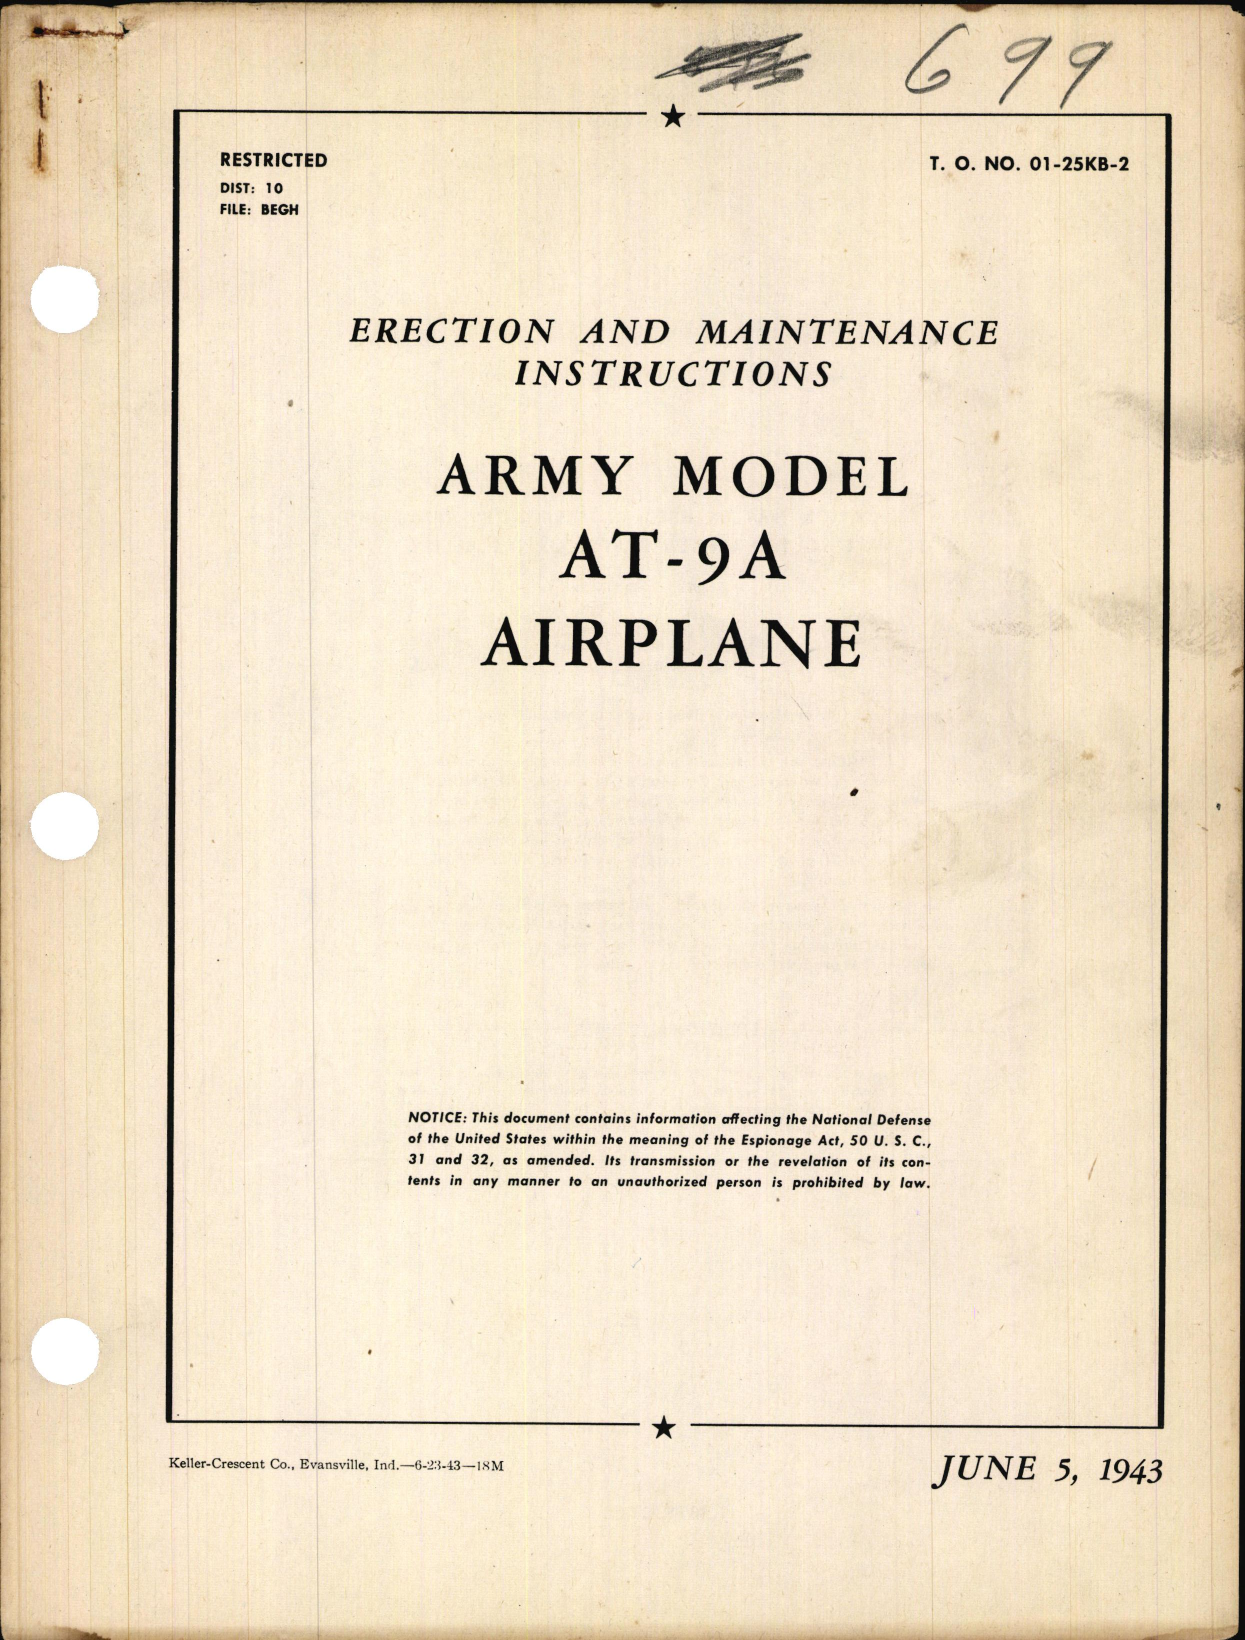 Sample page 1 from AirCorps Library document: Erection & Maintenance Instructions for Army Model AT-9A Airplane